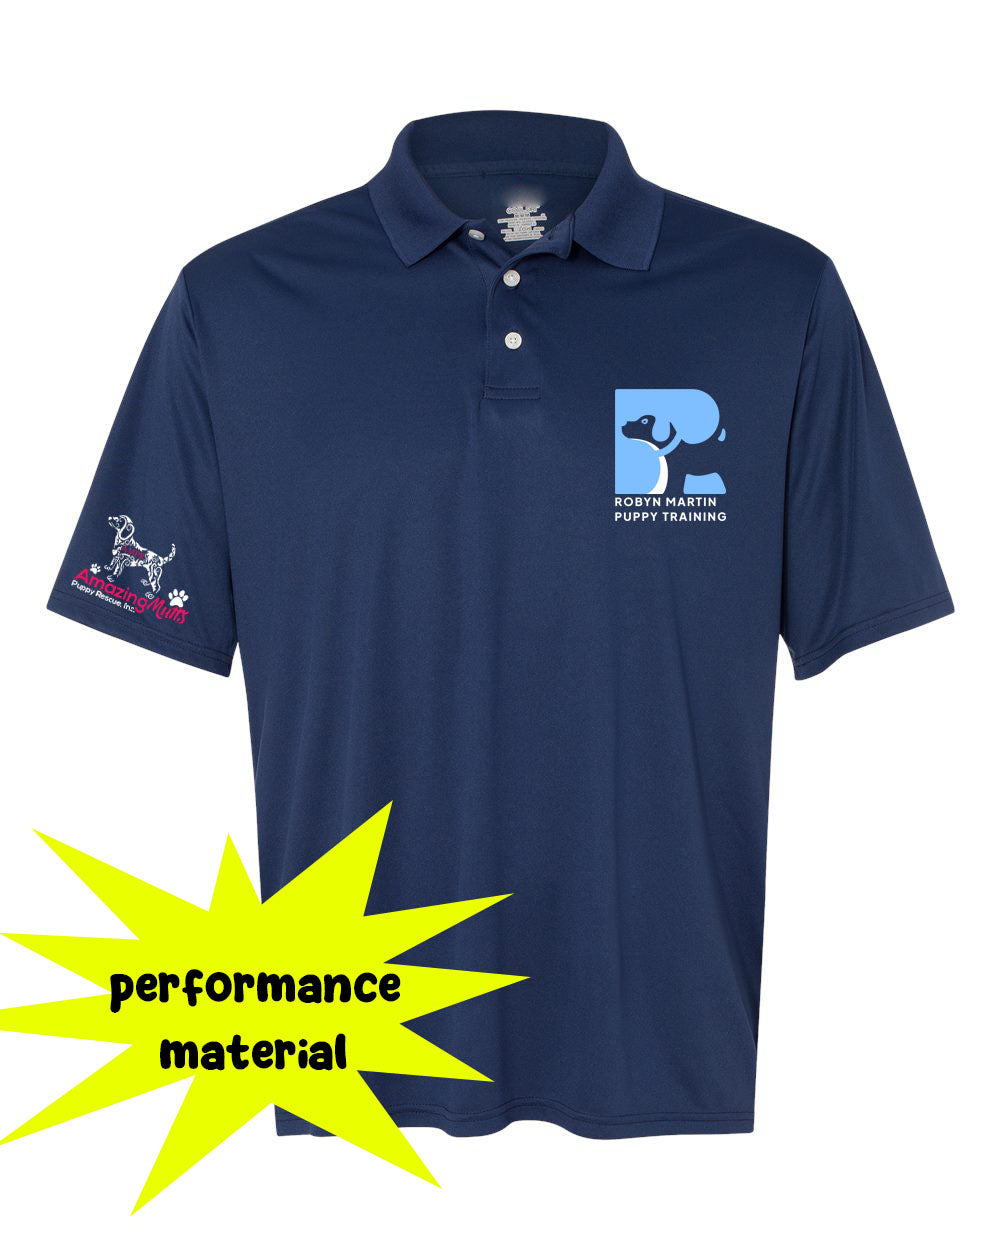 Robyn Martin Dog Training Performance Material Polo T-Shirt